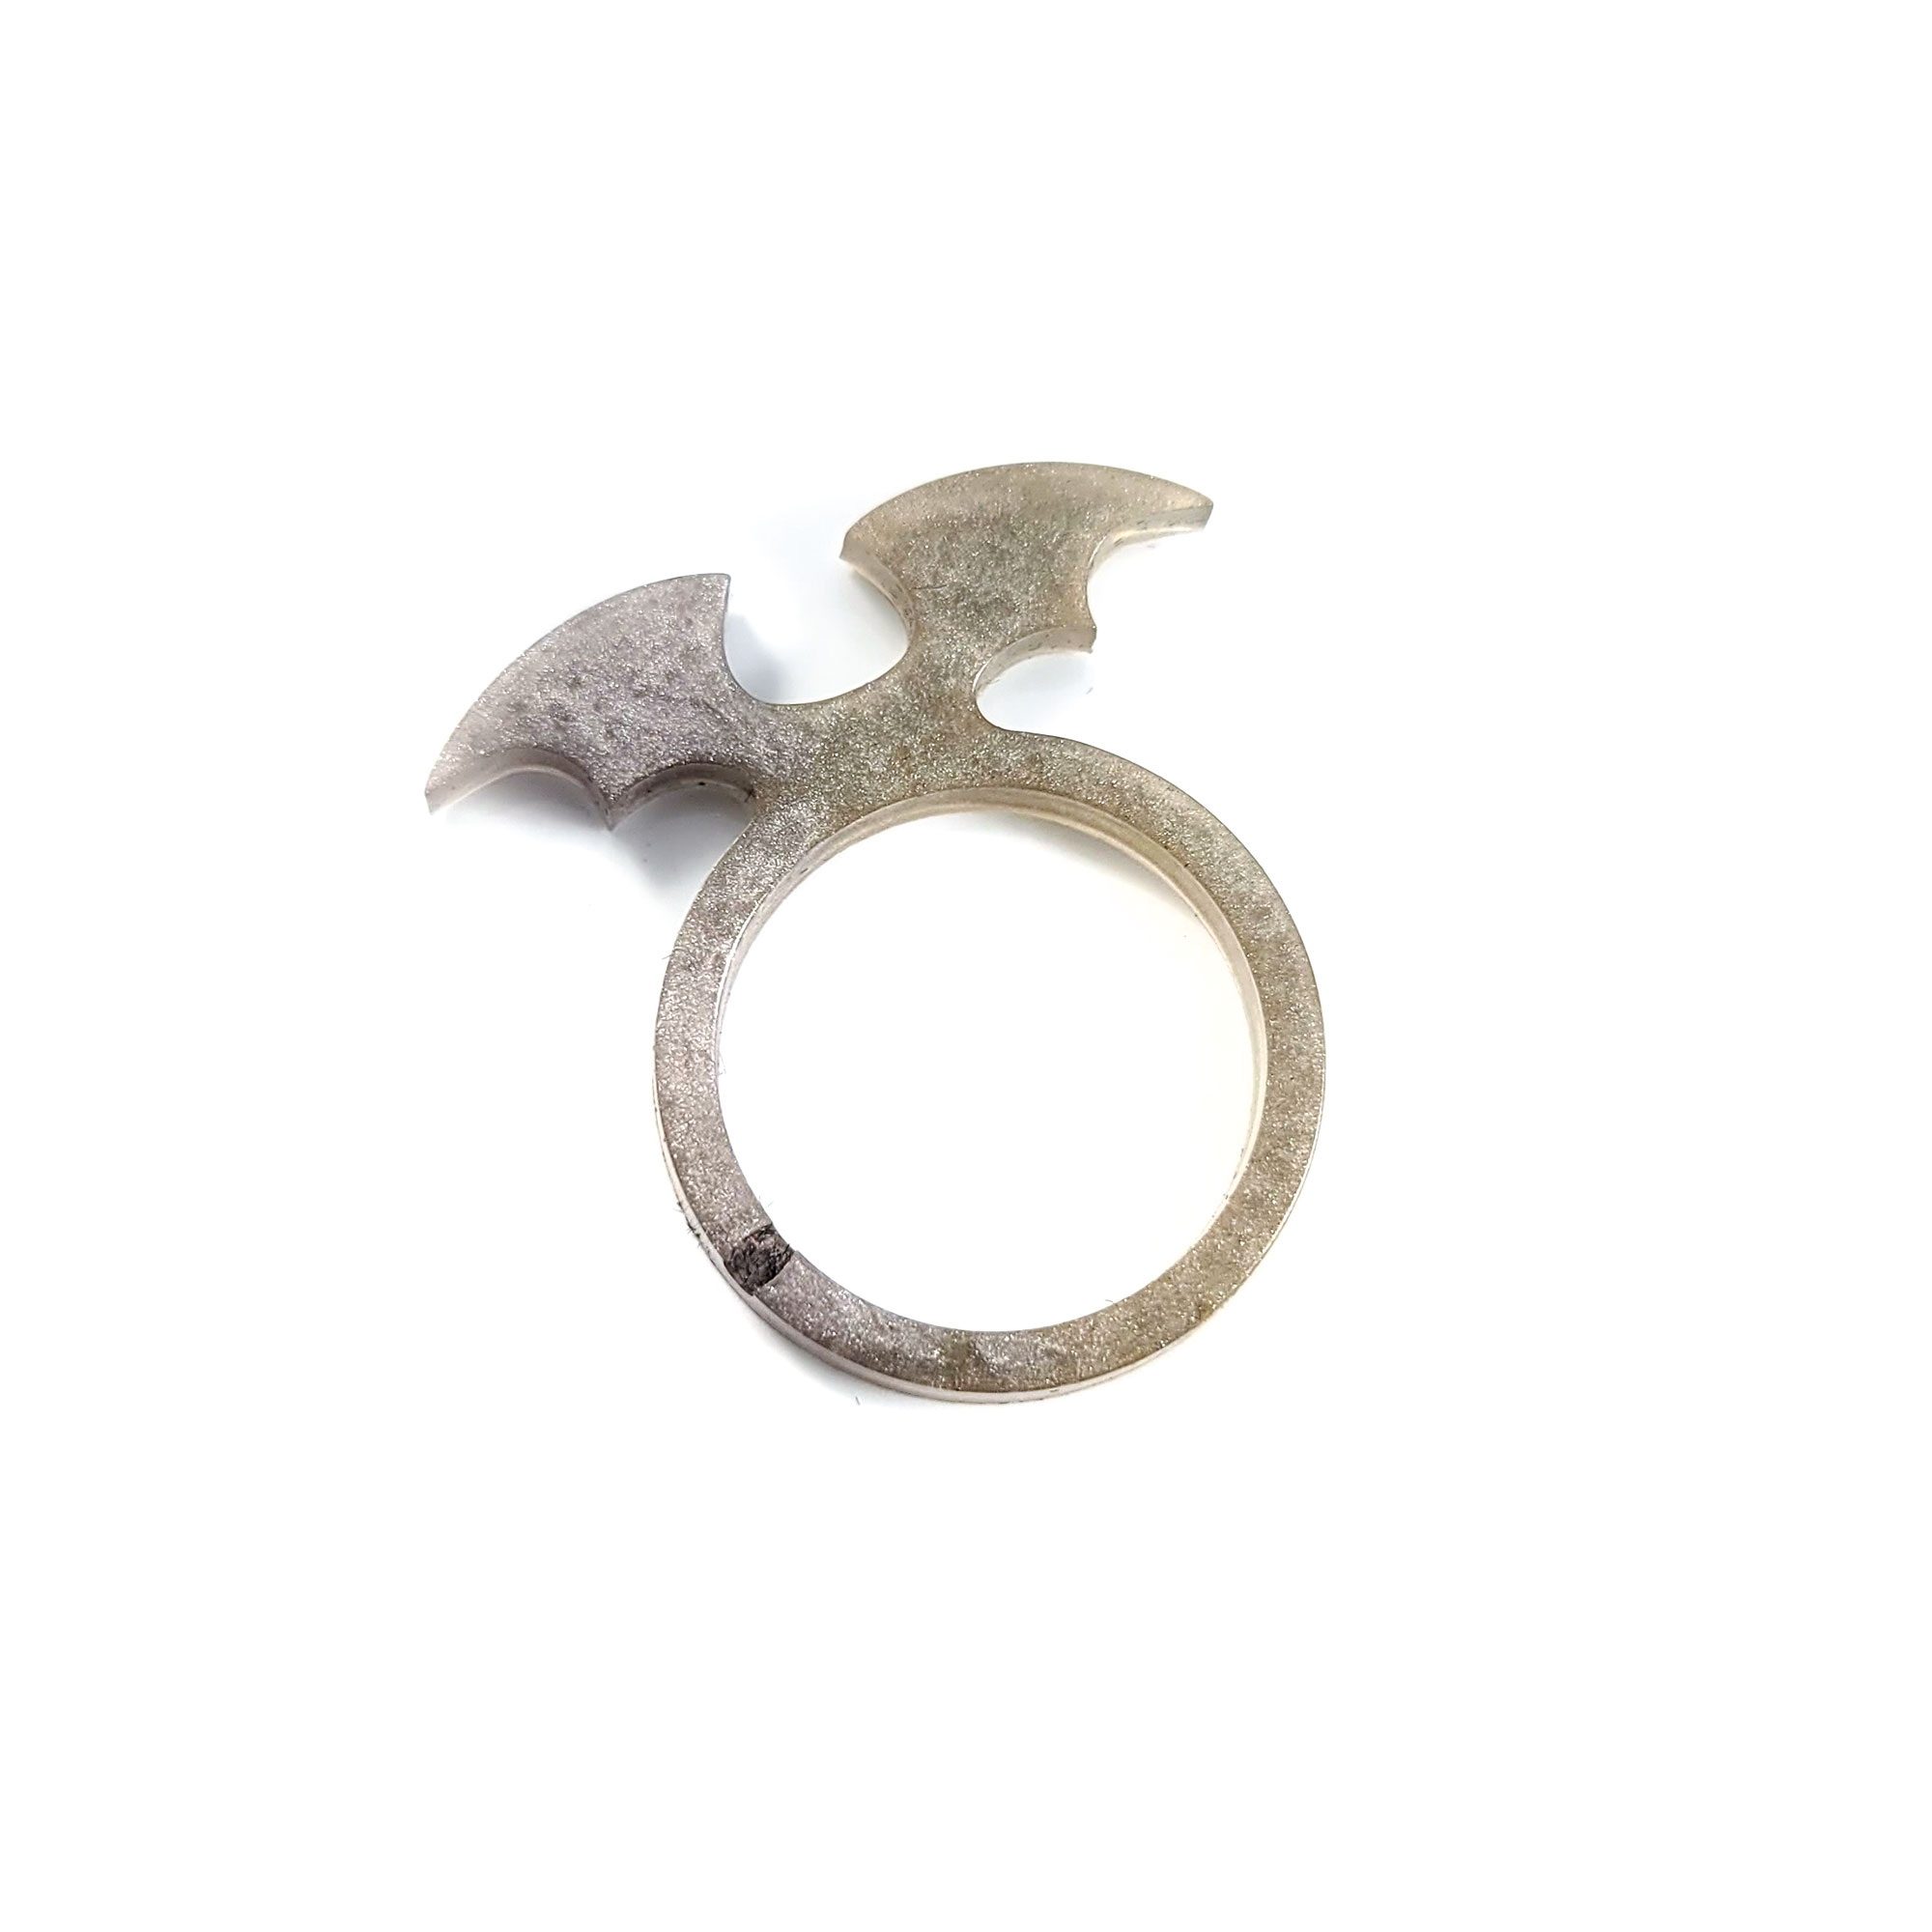 Gray Bat Wing Ring by Wilde Designs